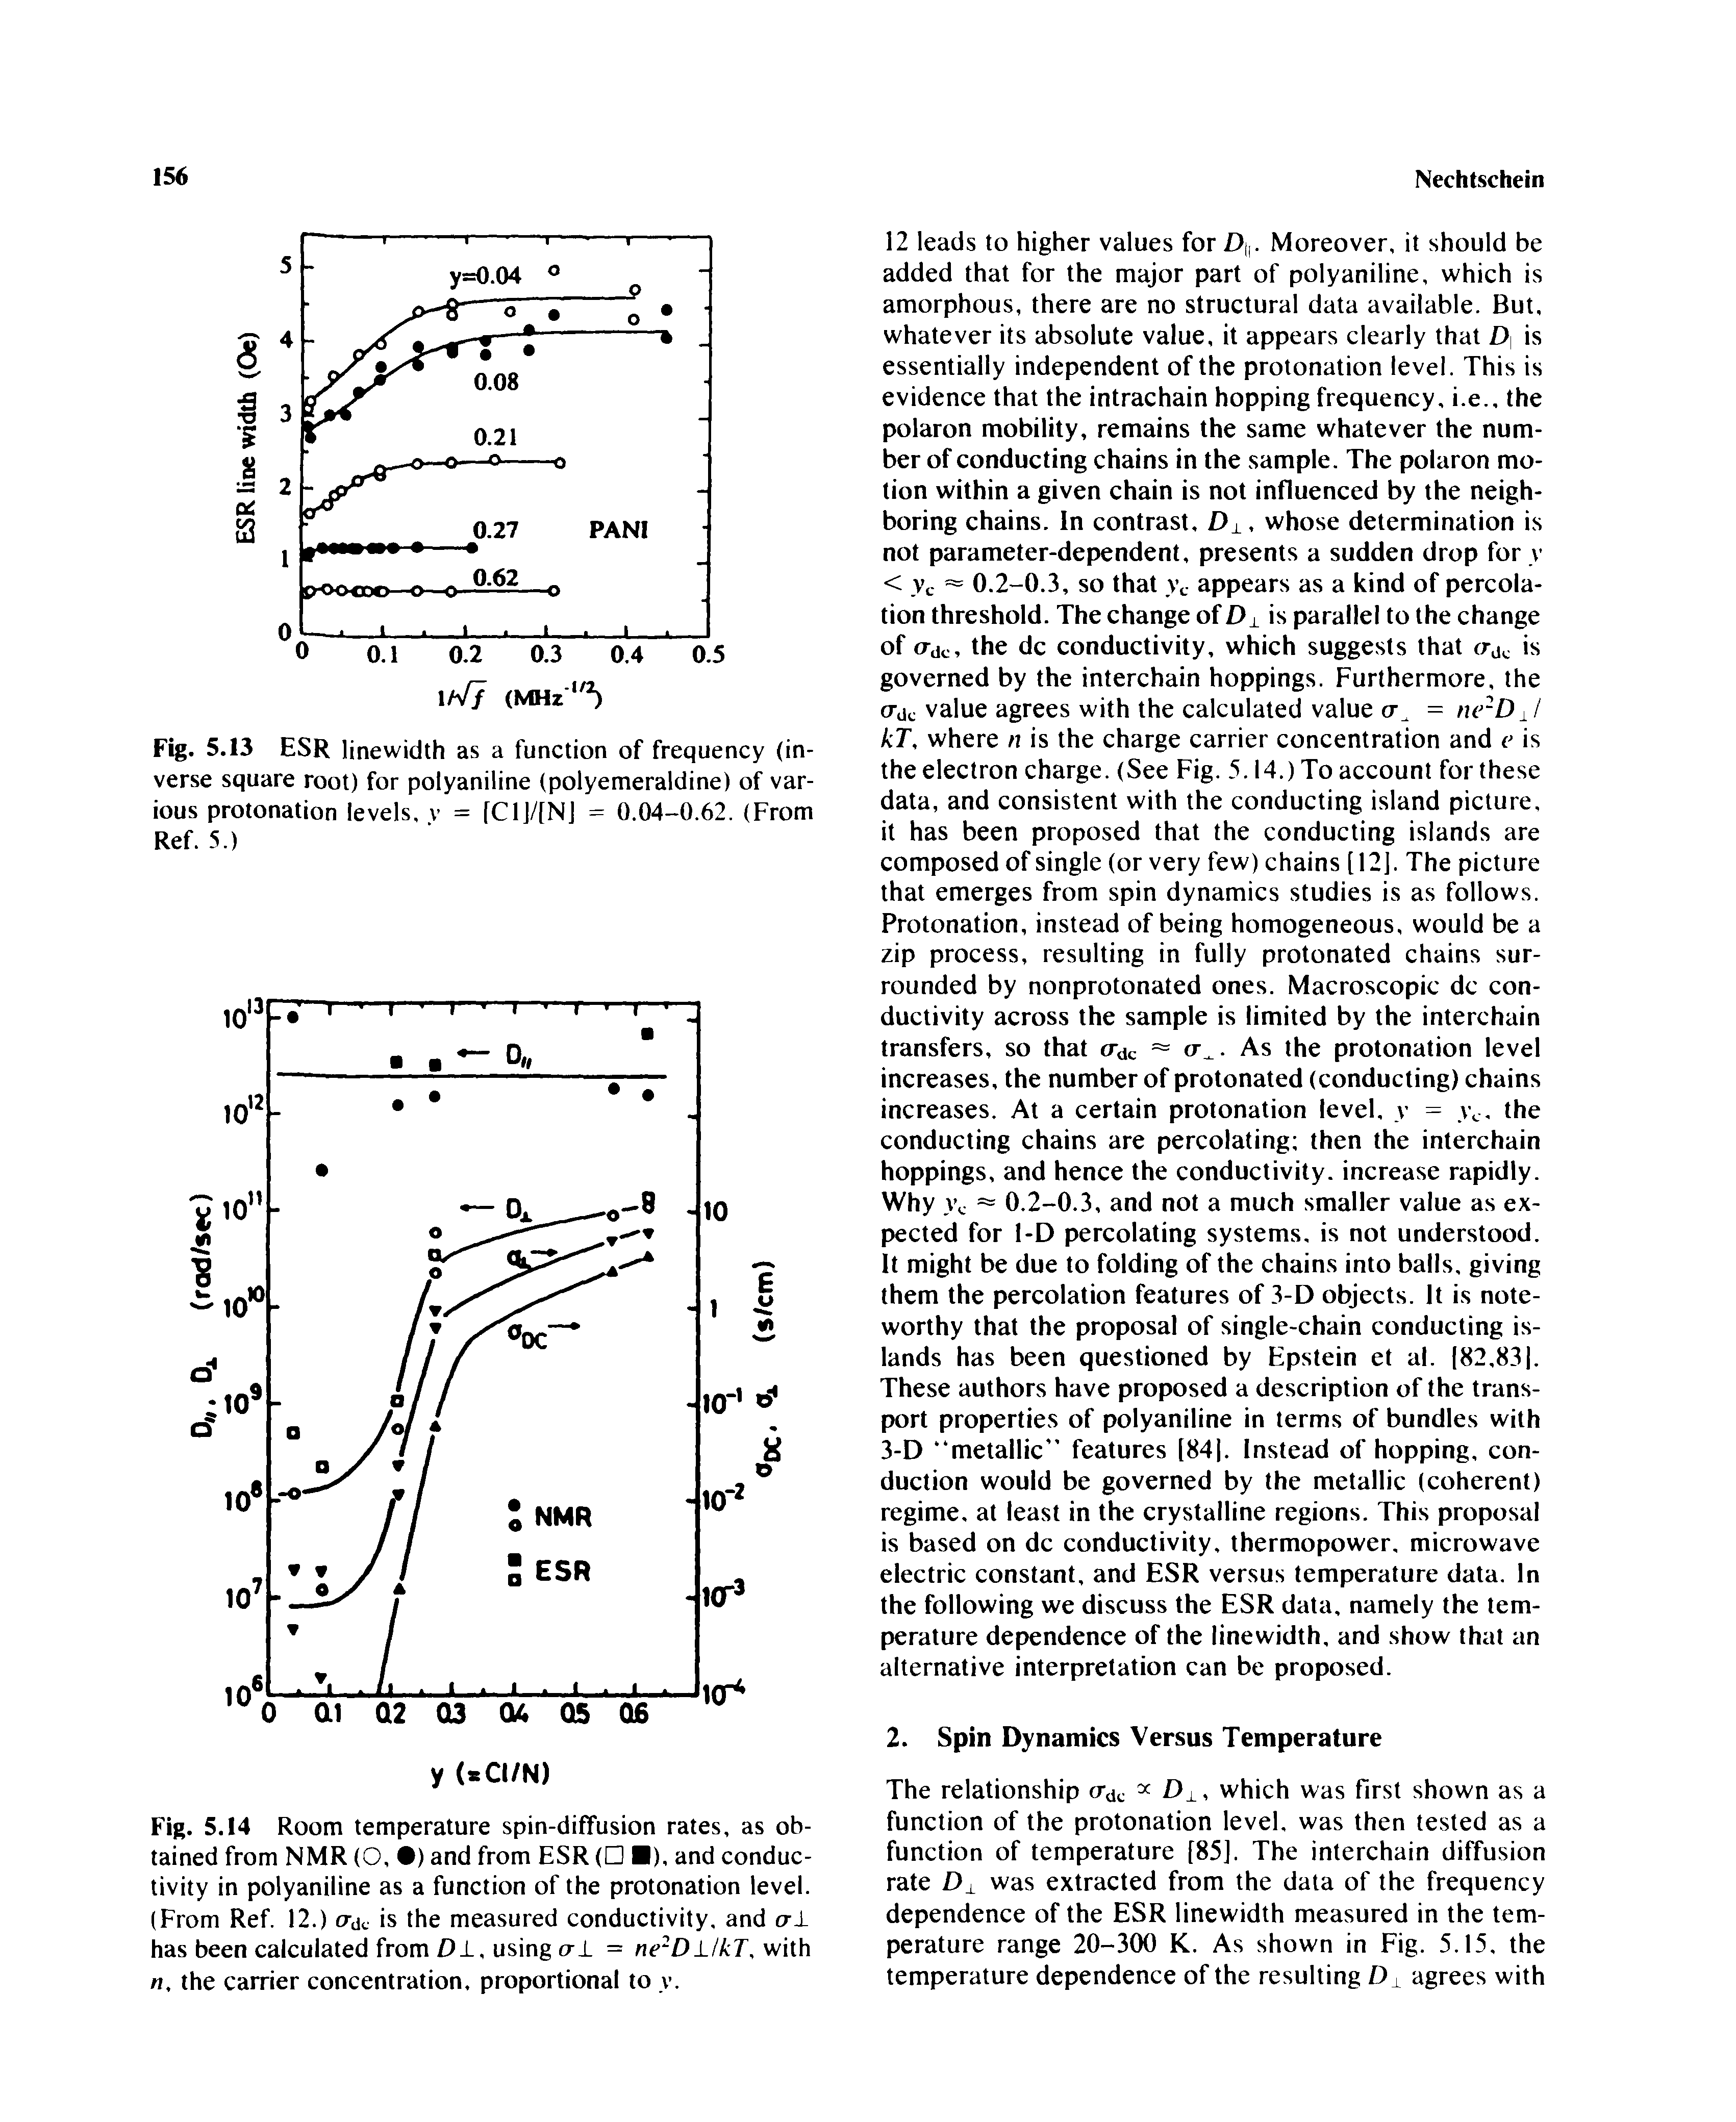 Fig. 5.14 Room temperature spin-diffusion rates, as obtained from NMR (O, ) and from ESR ( ), and conductivity in polyaniline as a function of the protonation level. (From Ref. 12.) ad is the measured conductivity, and al has been calculated from Dl, using crl = ne DllkT, with rt. the carrier concentration, proportional to y.